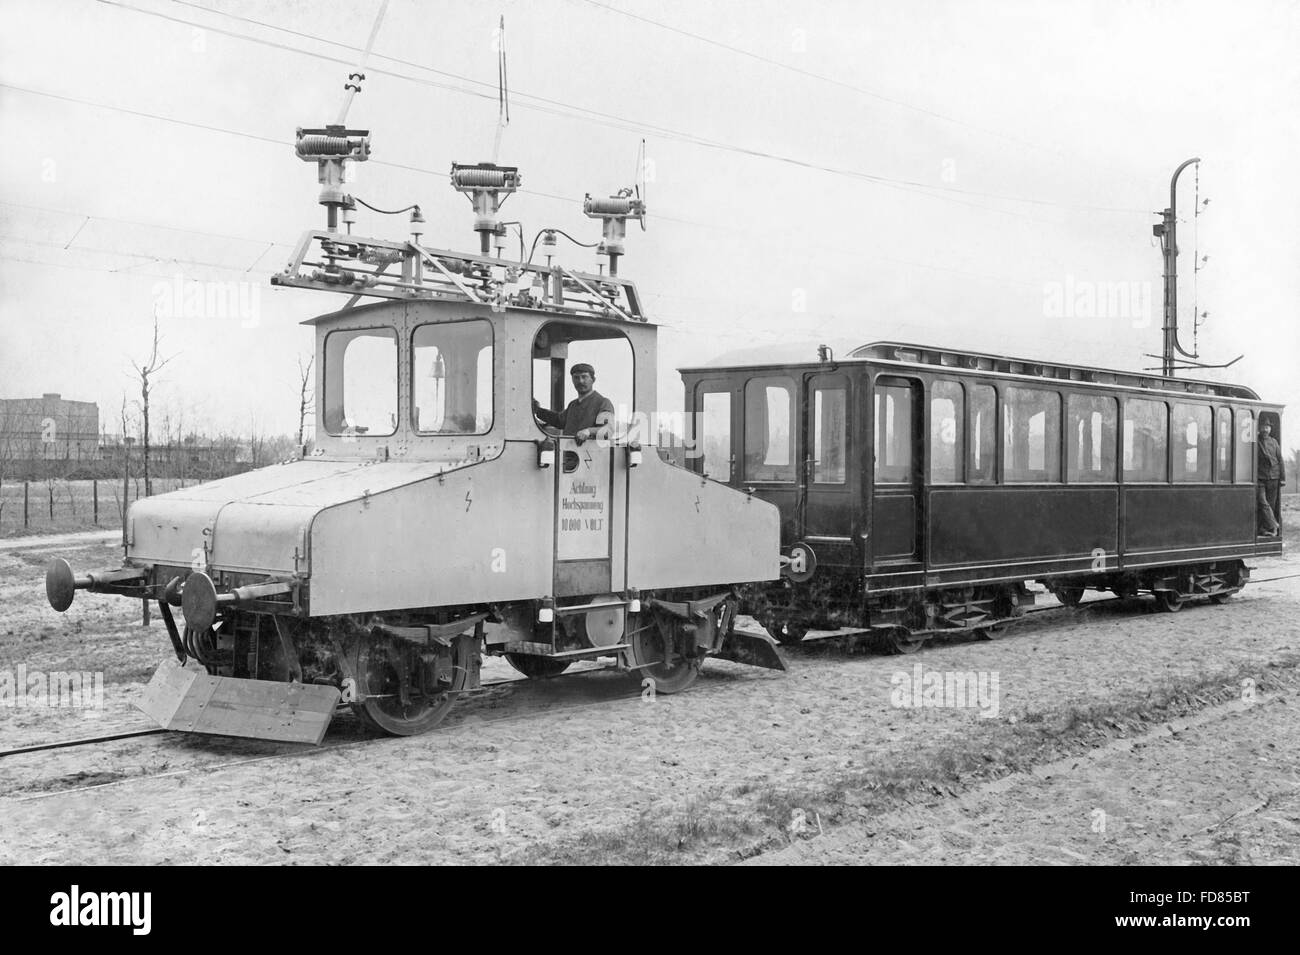 Electric Locomotive Germany High Resolution Stock Photography and Images -  Alamy